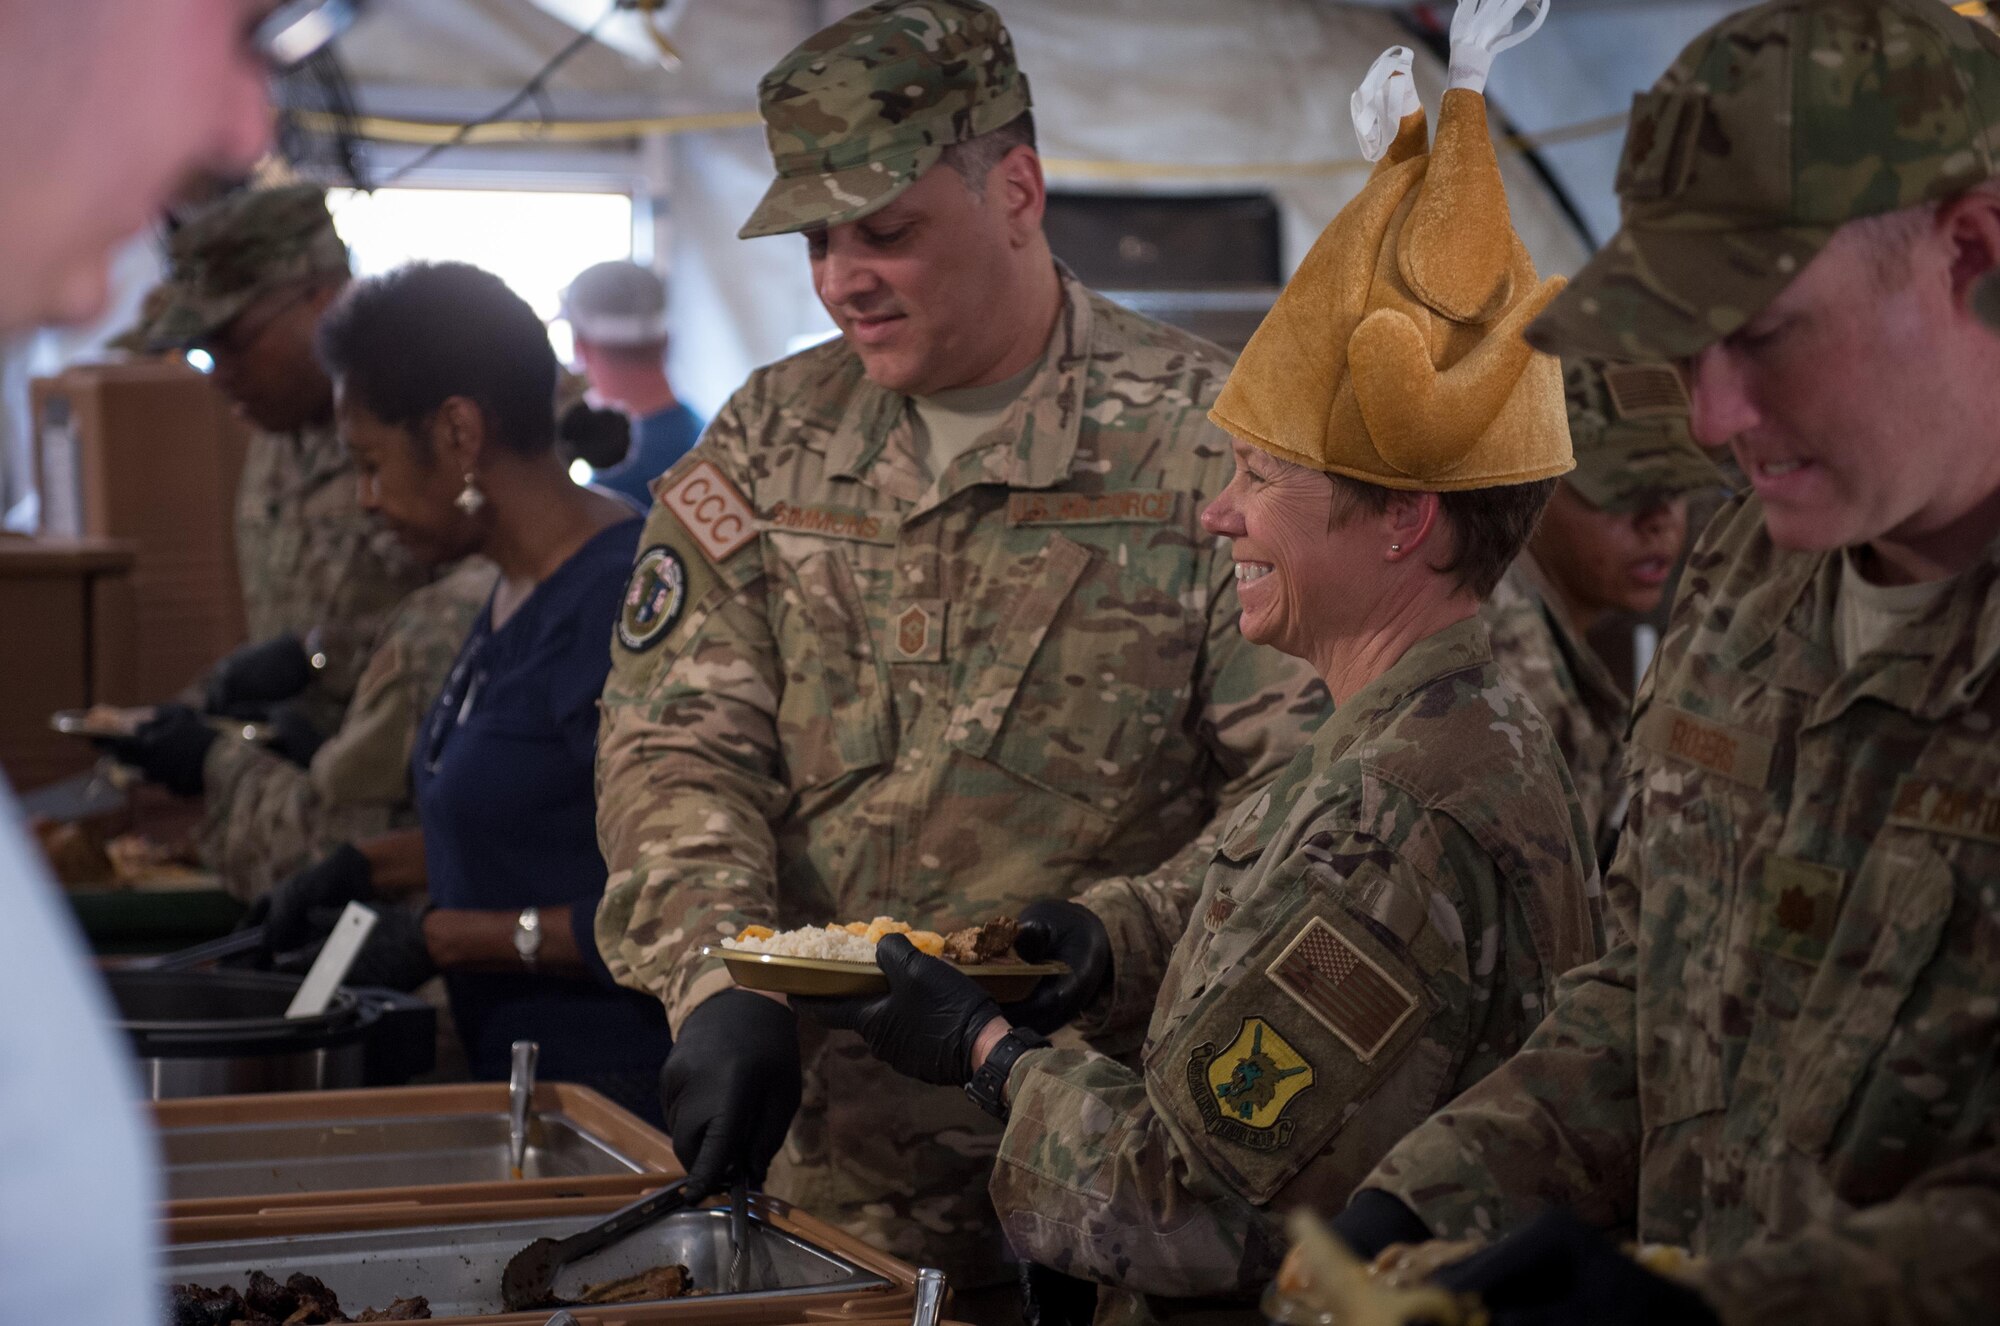 Lt. Col. Marlyce Roth, 724th Expeditionary Air Base Squadron commander, and other Air Force leadership serves Thanksgiving lunch at Air Base 201 in Agadez, Niger, Nov. 24, 2016. During a three day trip, Lt. Gen. Richard Clark, 17th Expeditionary Air Force commander, visited Airmen in Europe and Africa who support the Air Force's intelligence, surveillance and reconnaissance mission. This was Clark's first visit to NAS Sigonella, Niamey and Agadez as 3rd Air Force commander. (U.S. Air Force photo by Tech. Sgt. Ryan Crane)